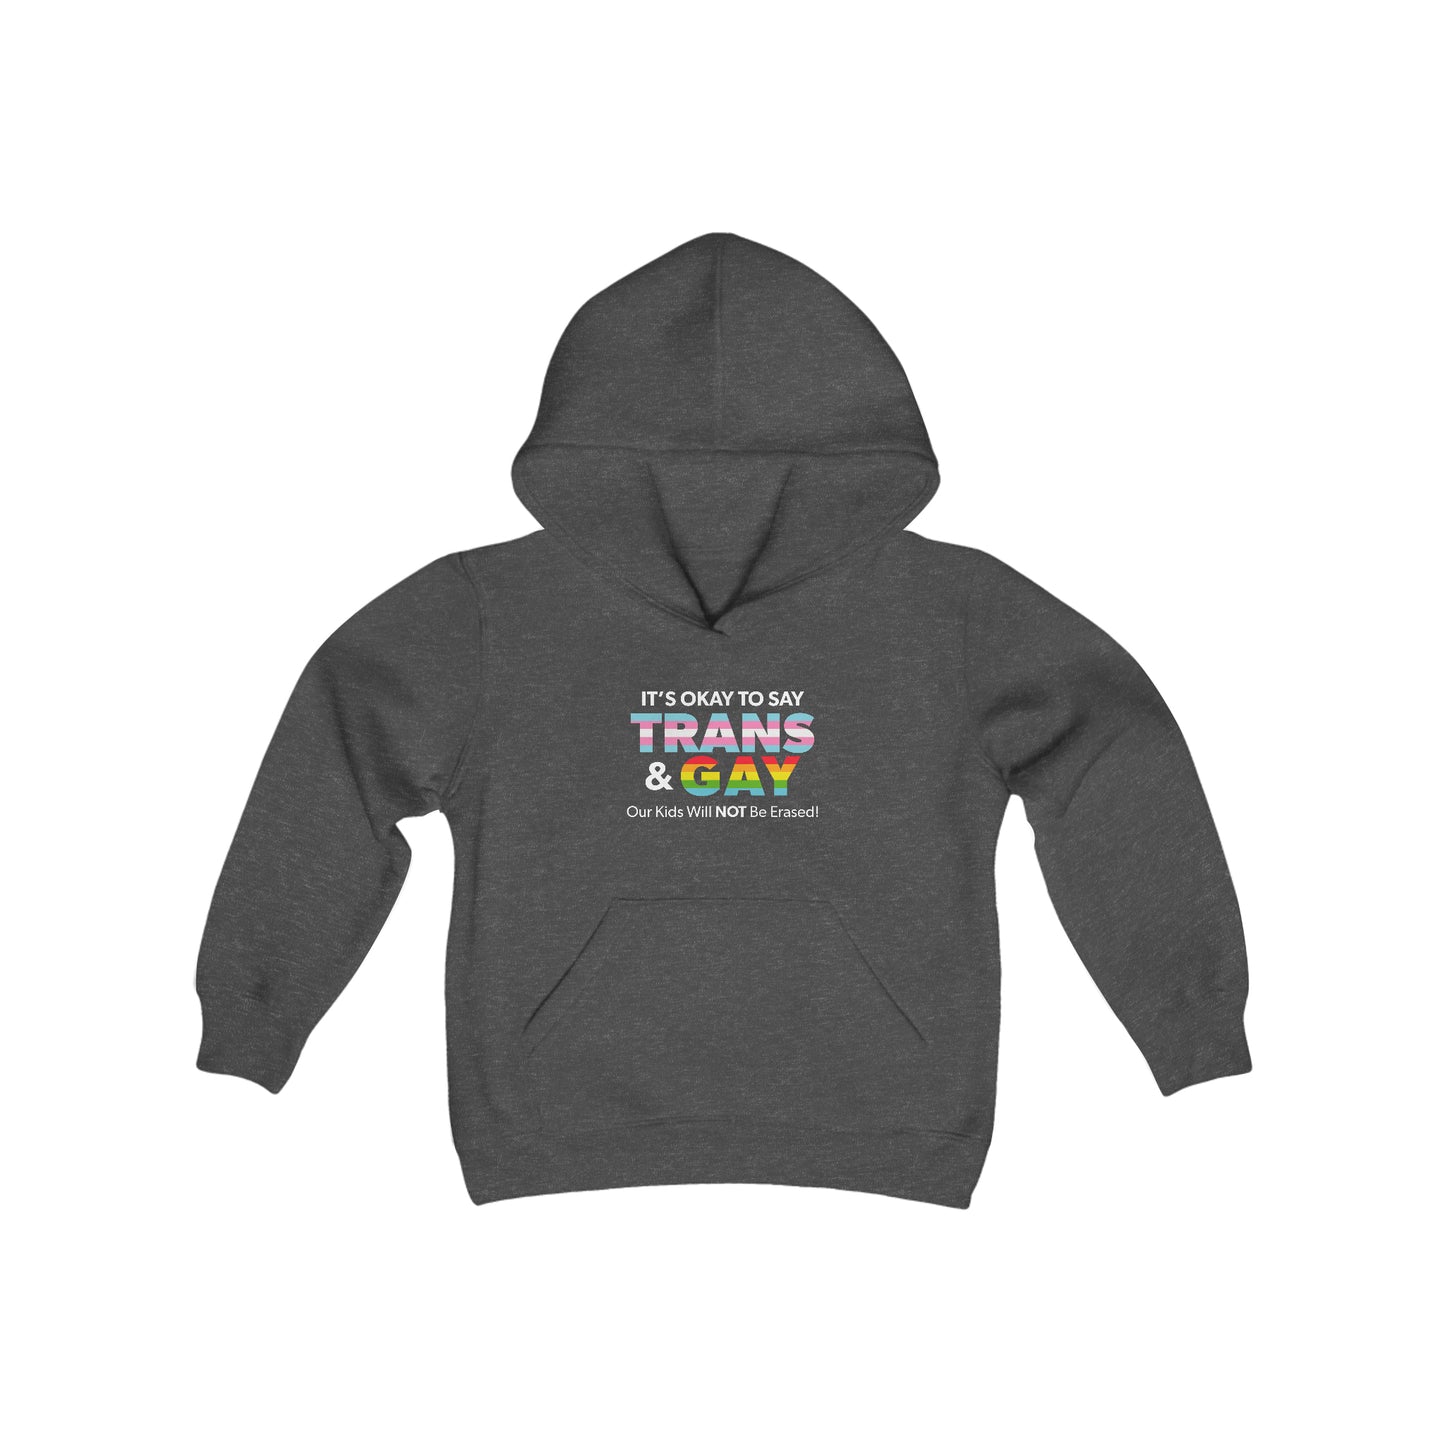 “It’s Okay to Say Trans & Gay” Youth Hoodie